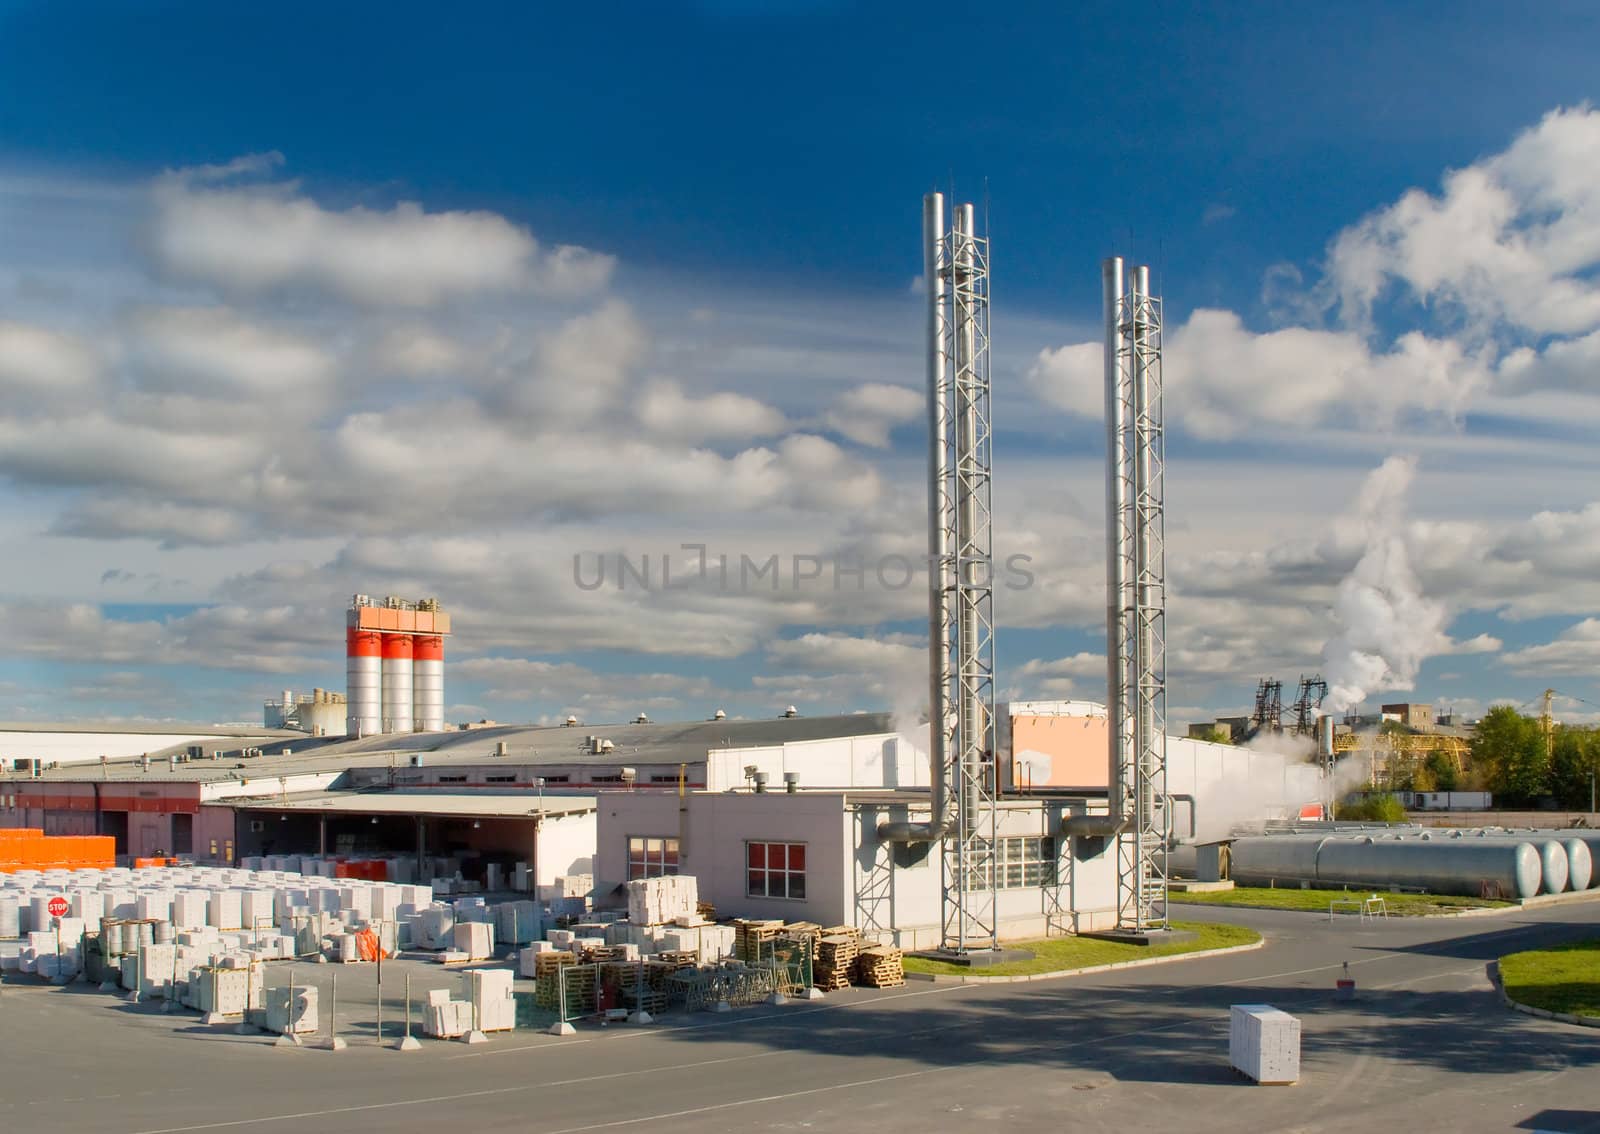 Factory with a chimney and smoke in sunny day by BIG_TAU